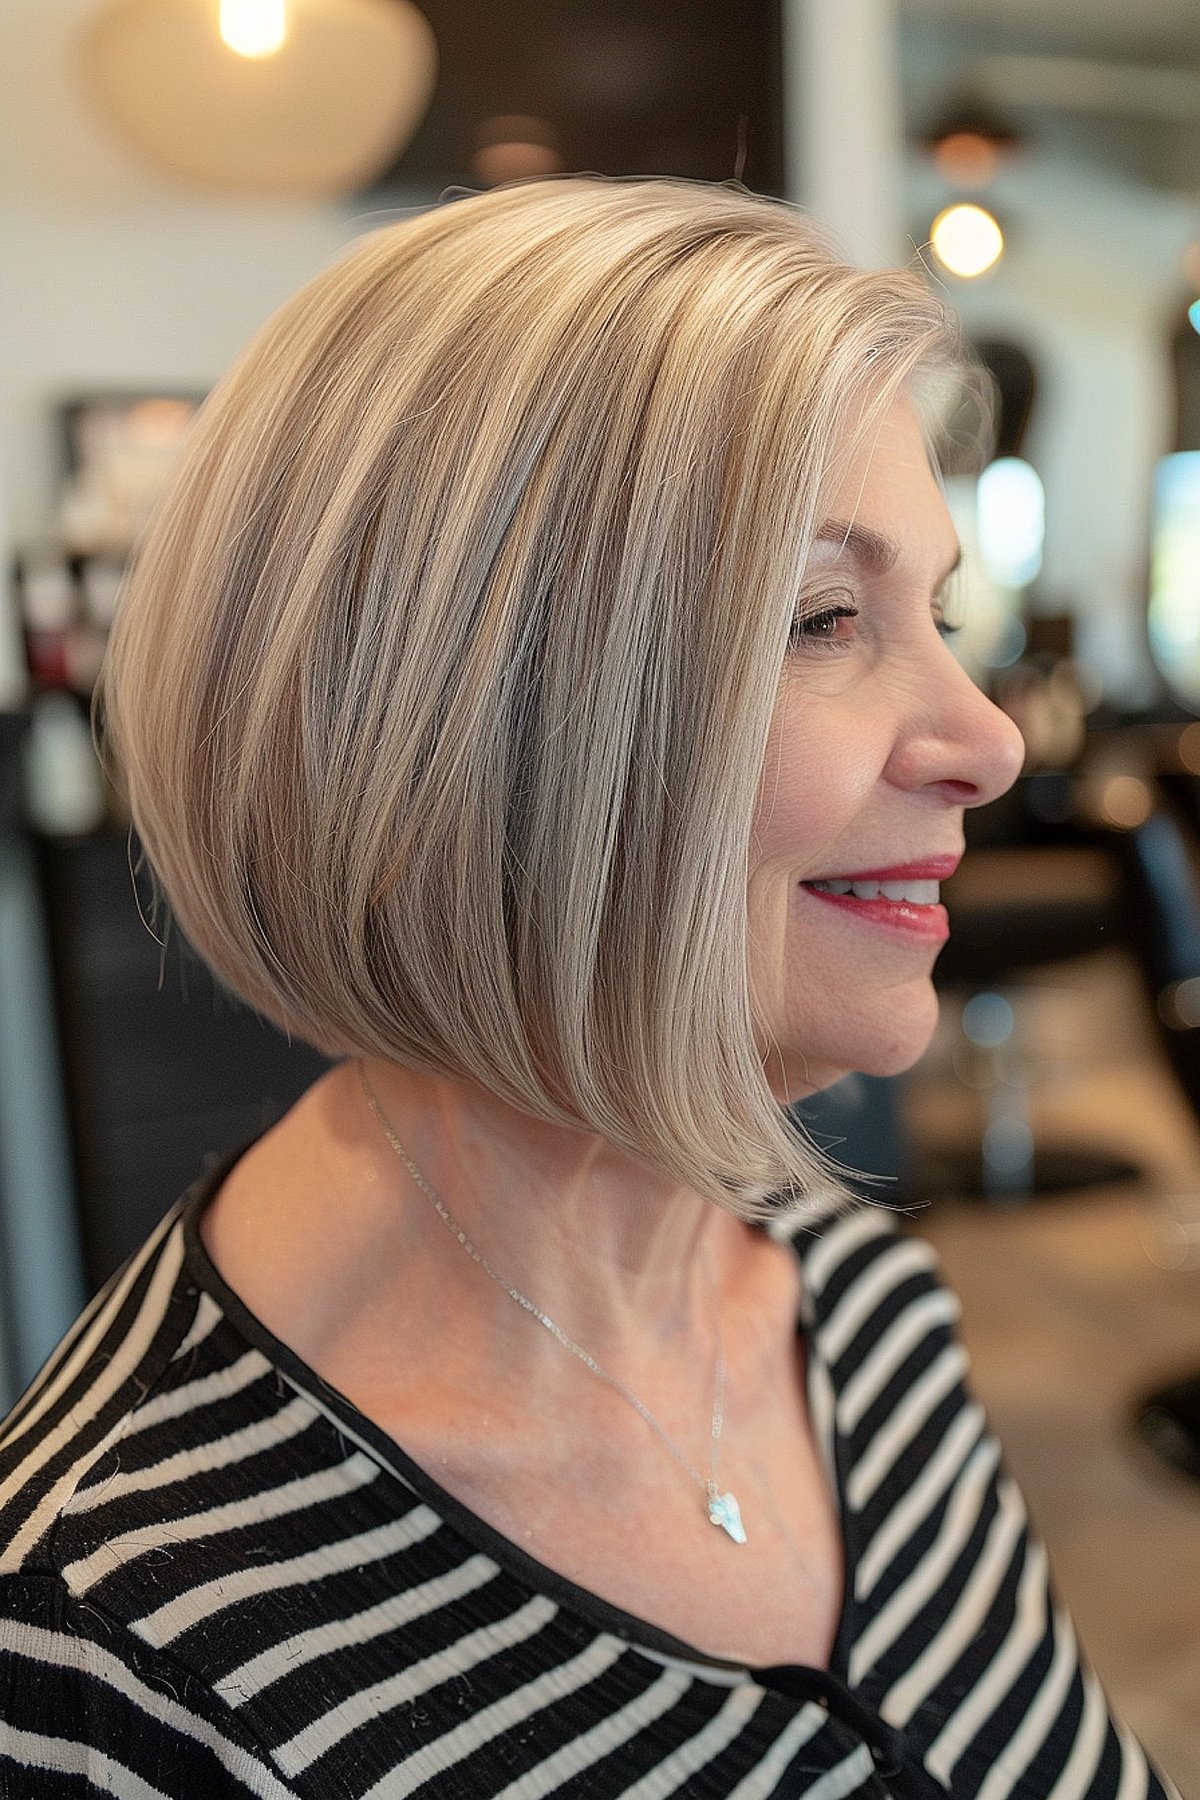 A-Line Bob Cut for a Lady in her 60s